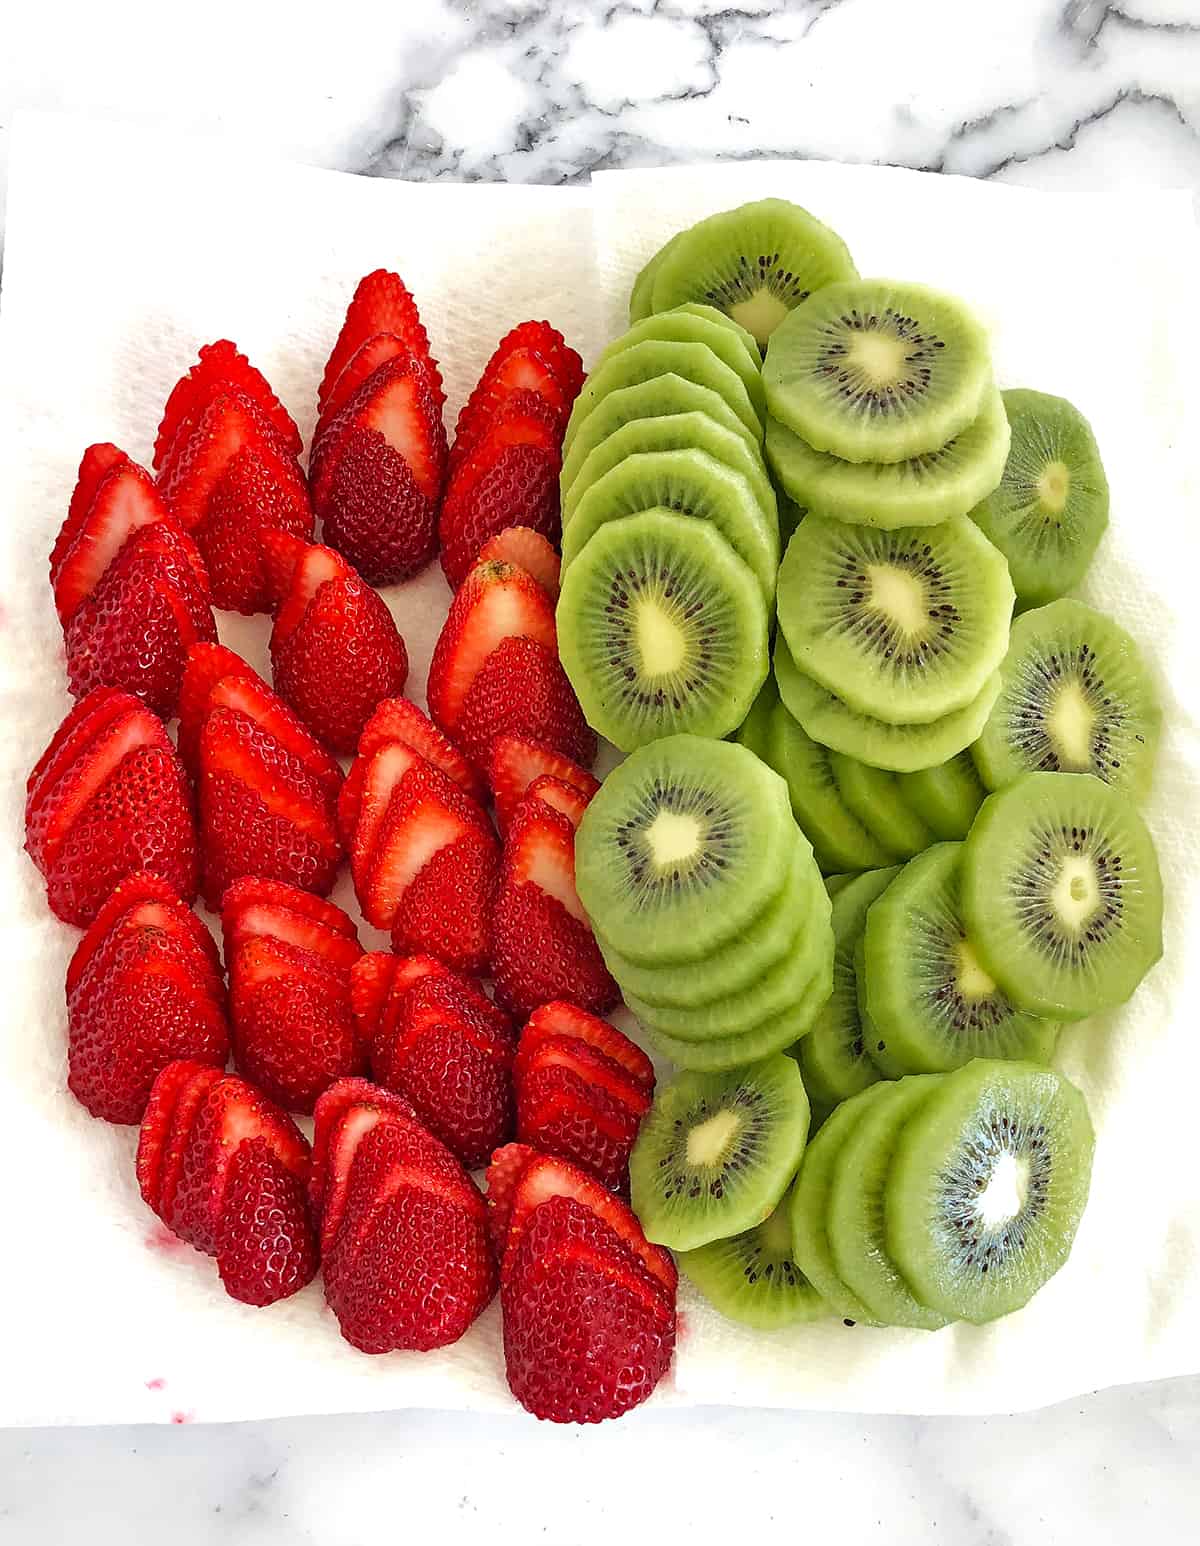 Slice the kiwis and strawberries, place them onto a paper towel for the excess juice to be absorbed, and set them aside until they’re ready to be used.